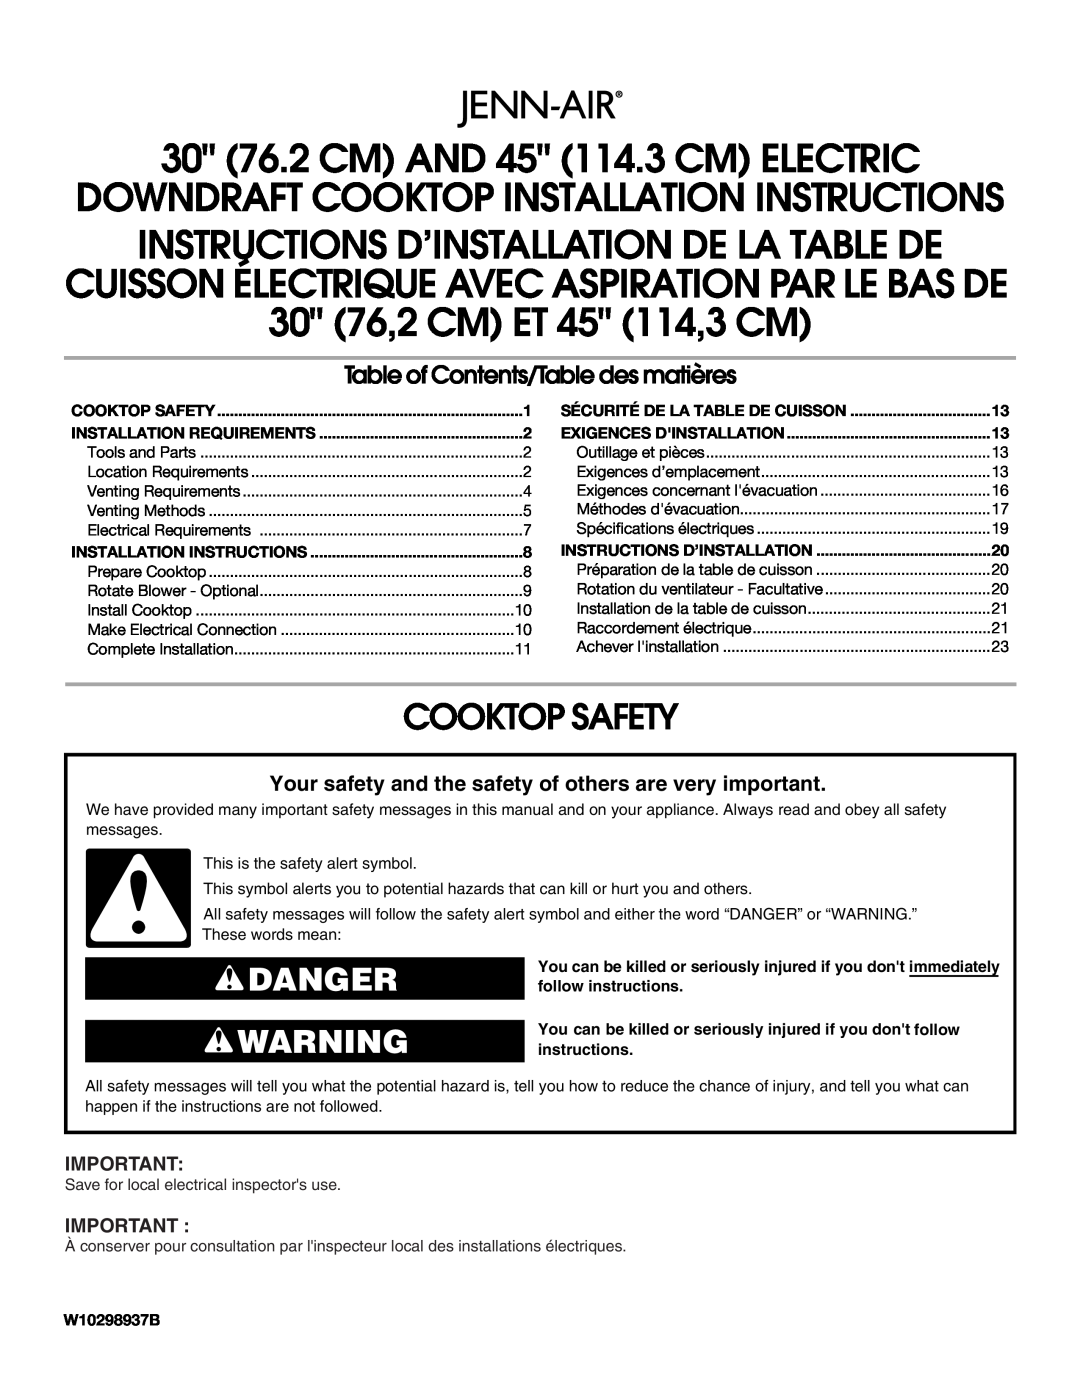 Jenn-Air W10298937B installation instructions Cooktop Safety, Danger, 30 76.2 CM AND 45 114.3 CM ELECTRIC 